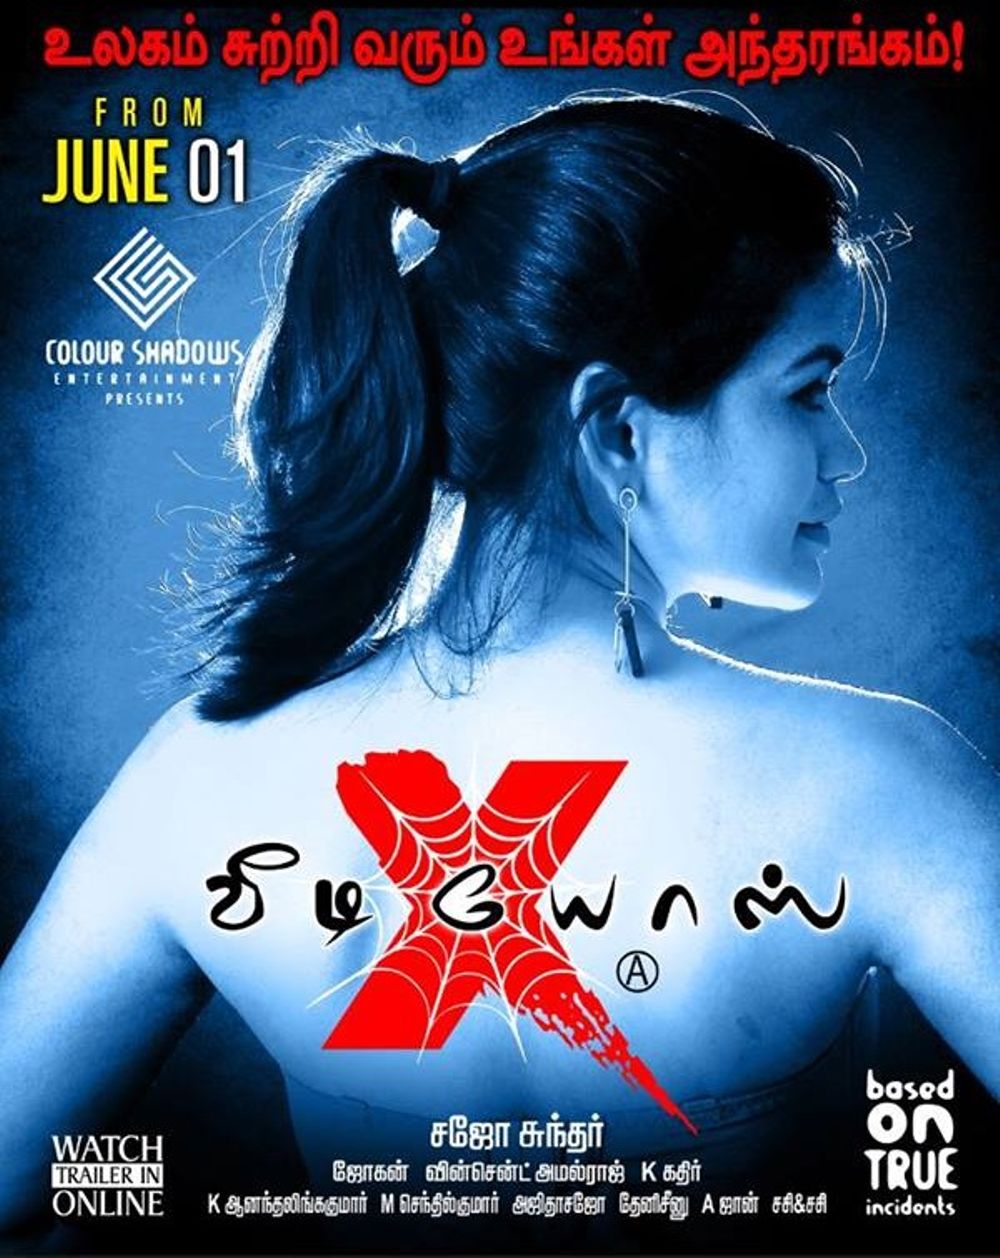 Akshara Singh X Photo X Photo X Photo Hd - X Videos Movie Review (2018) - Rating, Cast & Crew With Synopsis